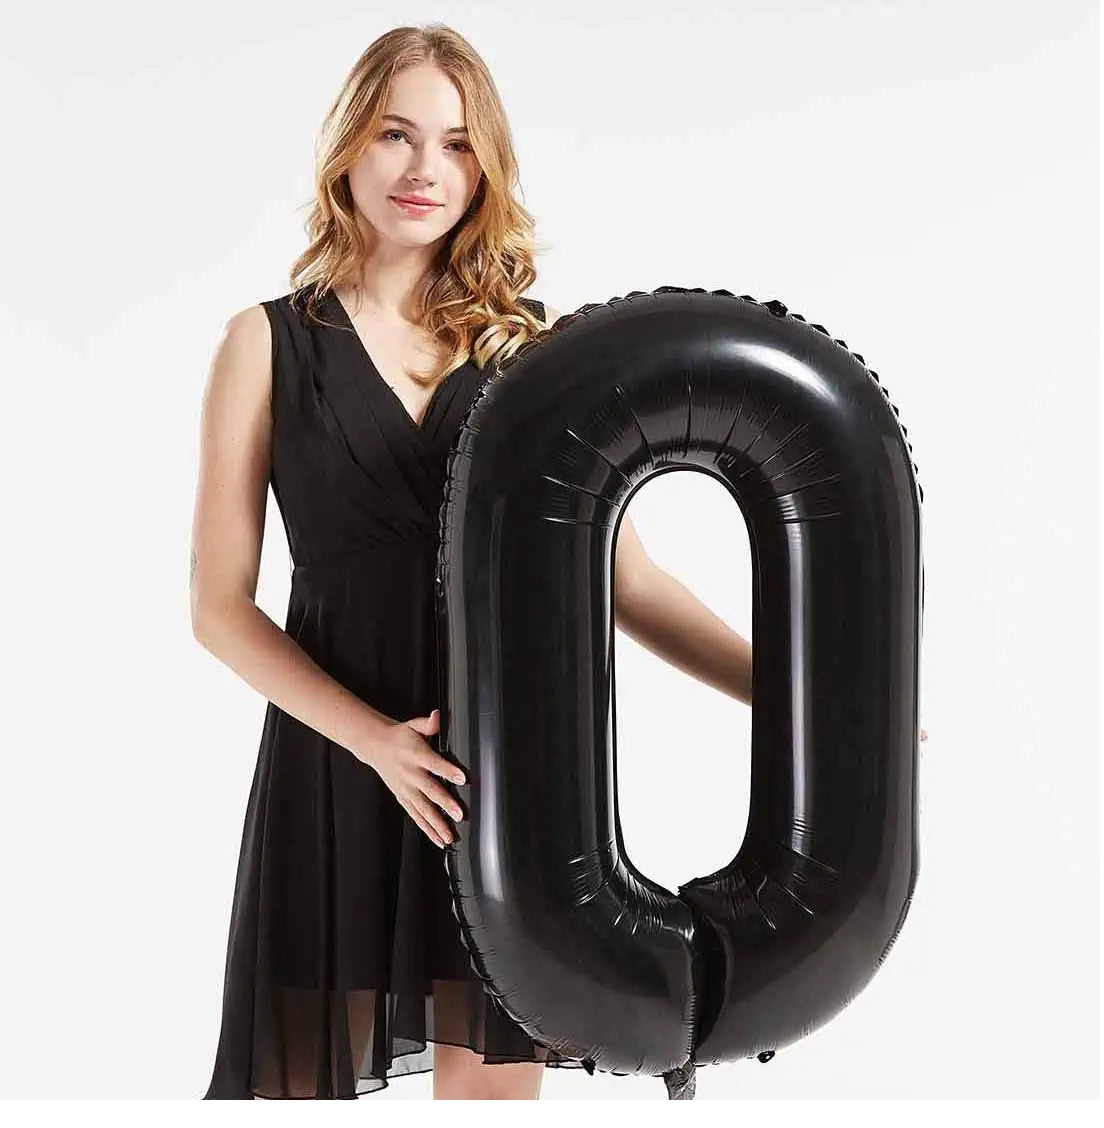 Number 0 Black Foil Balloon 40 Inches